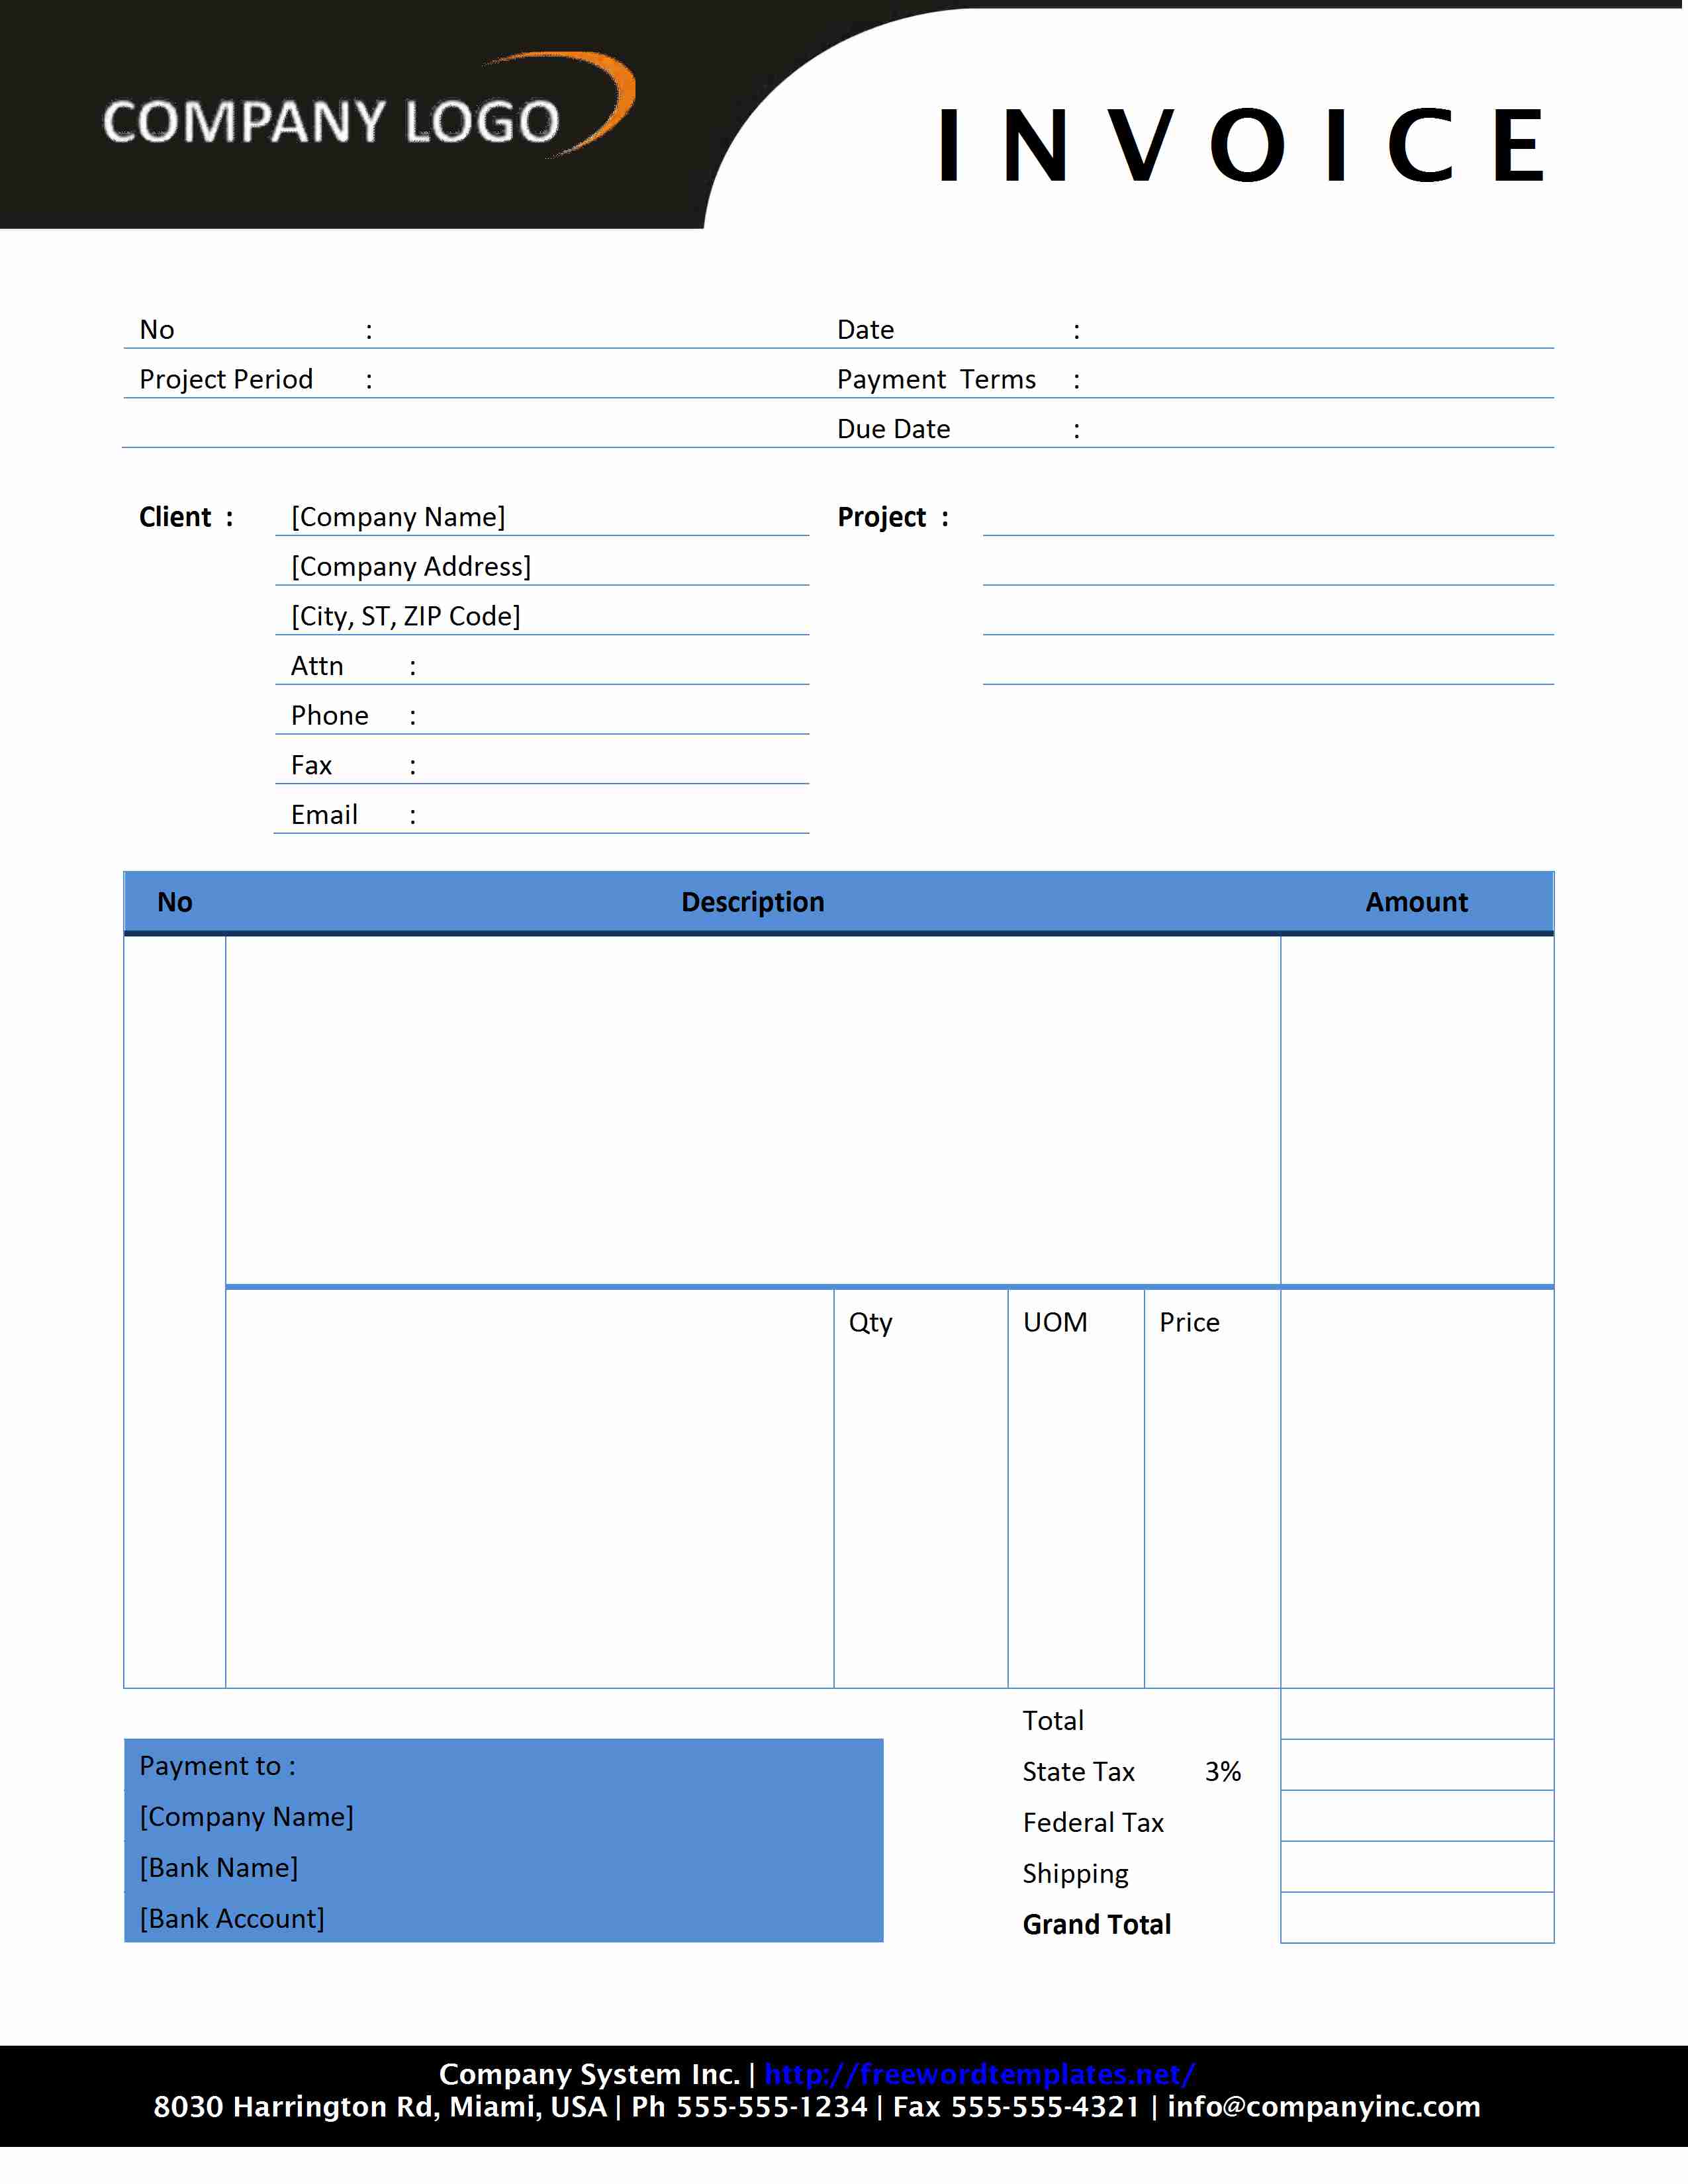 Consultant Invoice Mixed Services and Products1